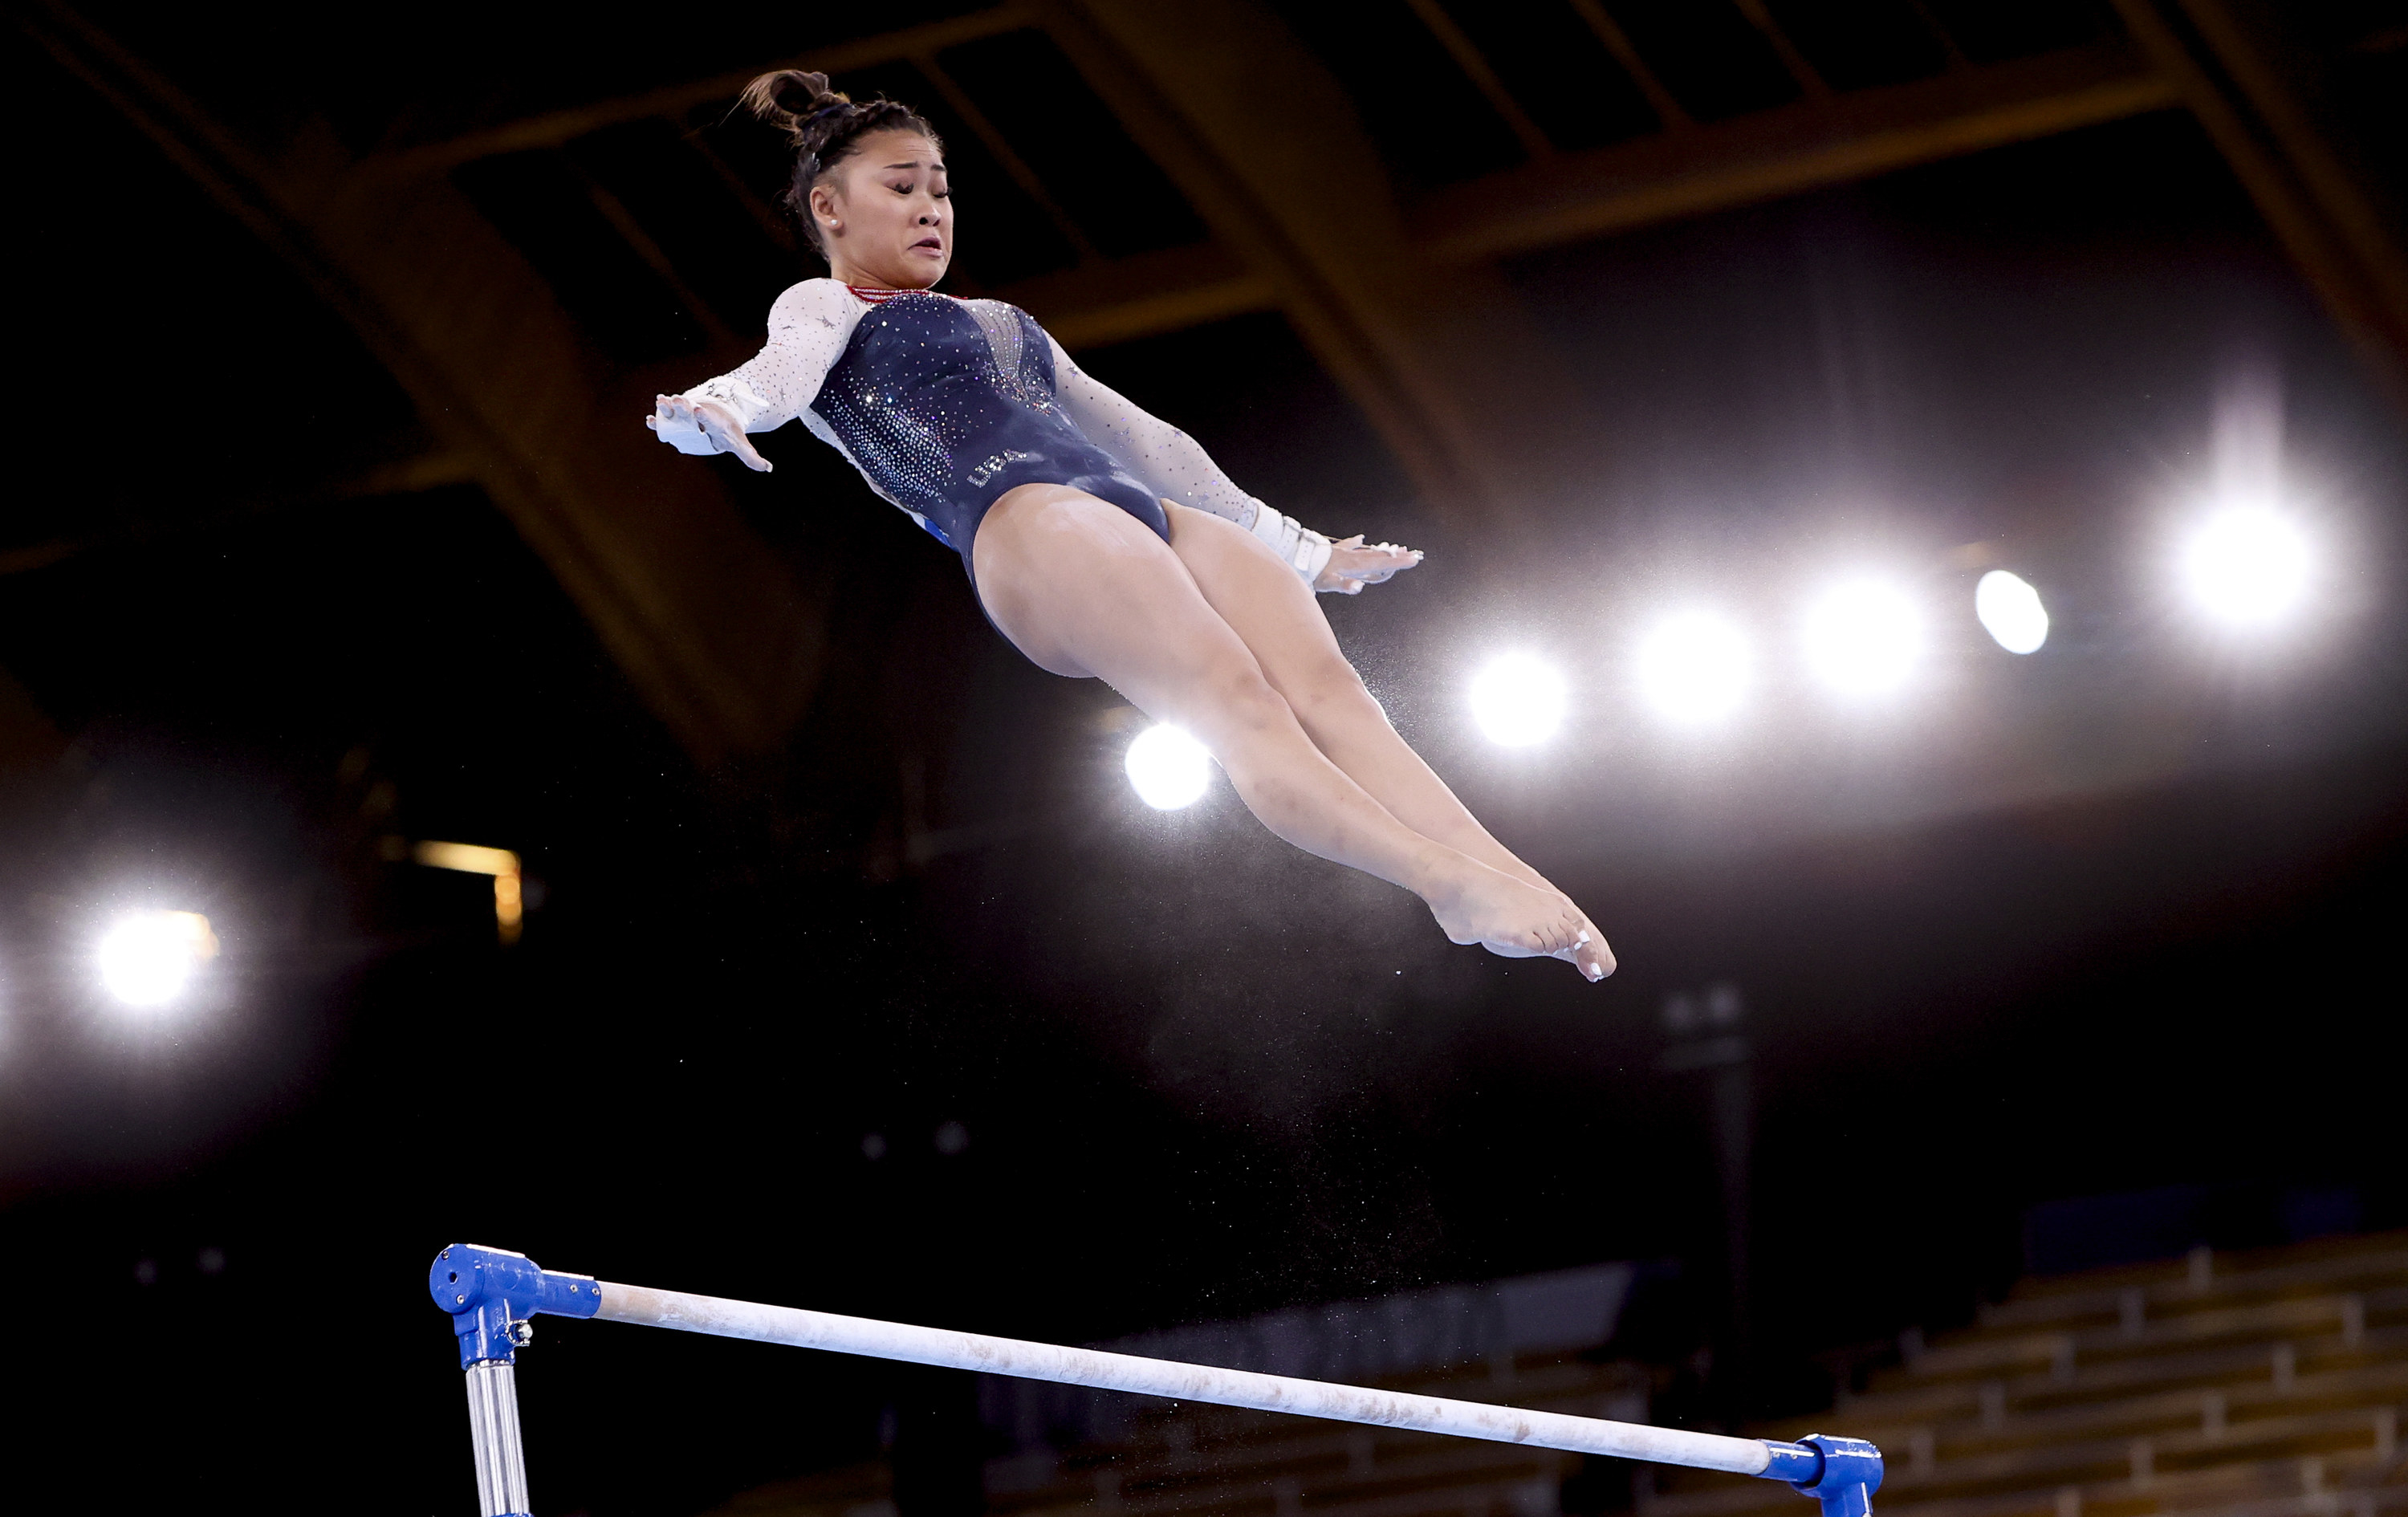 Sunisa Lee competes on the uneven bars